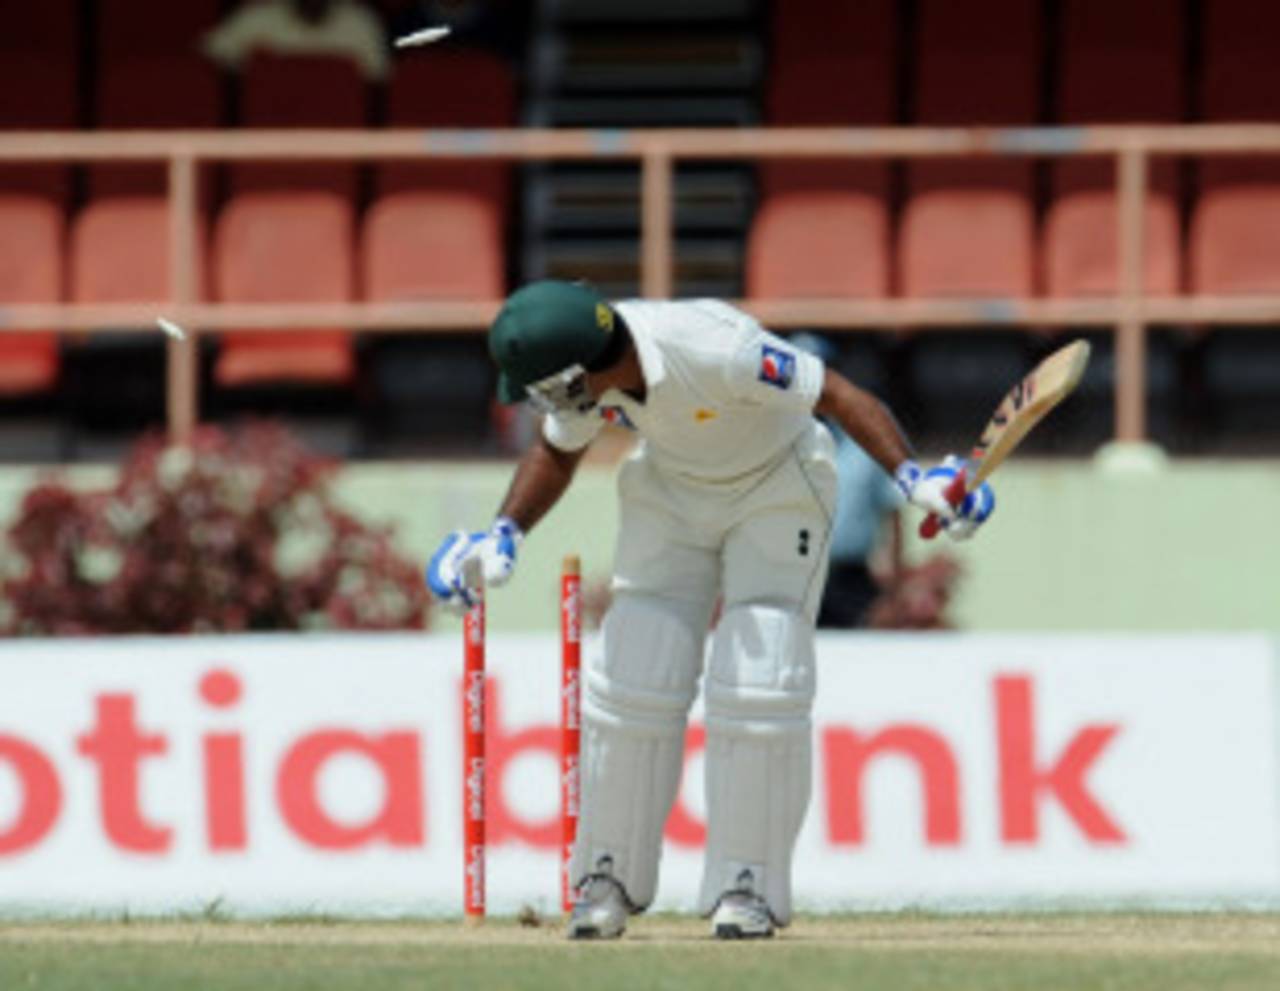 Asad Shafiq is bowled for 42, West Indies v Pakistan, 1st Test, Providence, 4th day, May 15, 2011